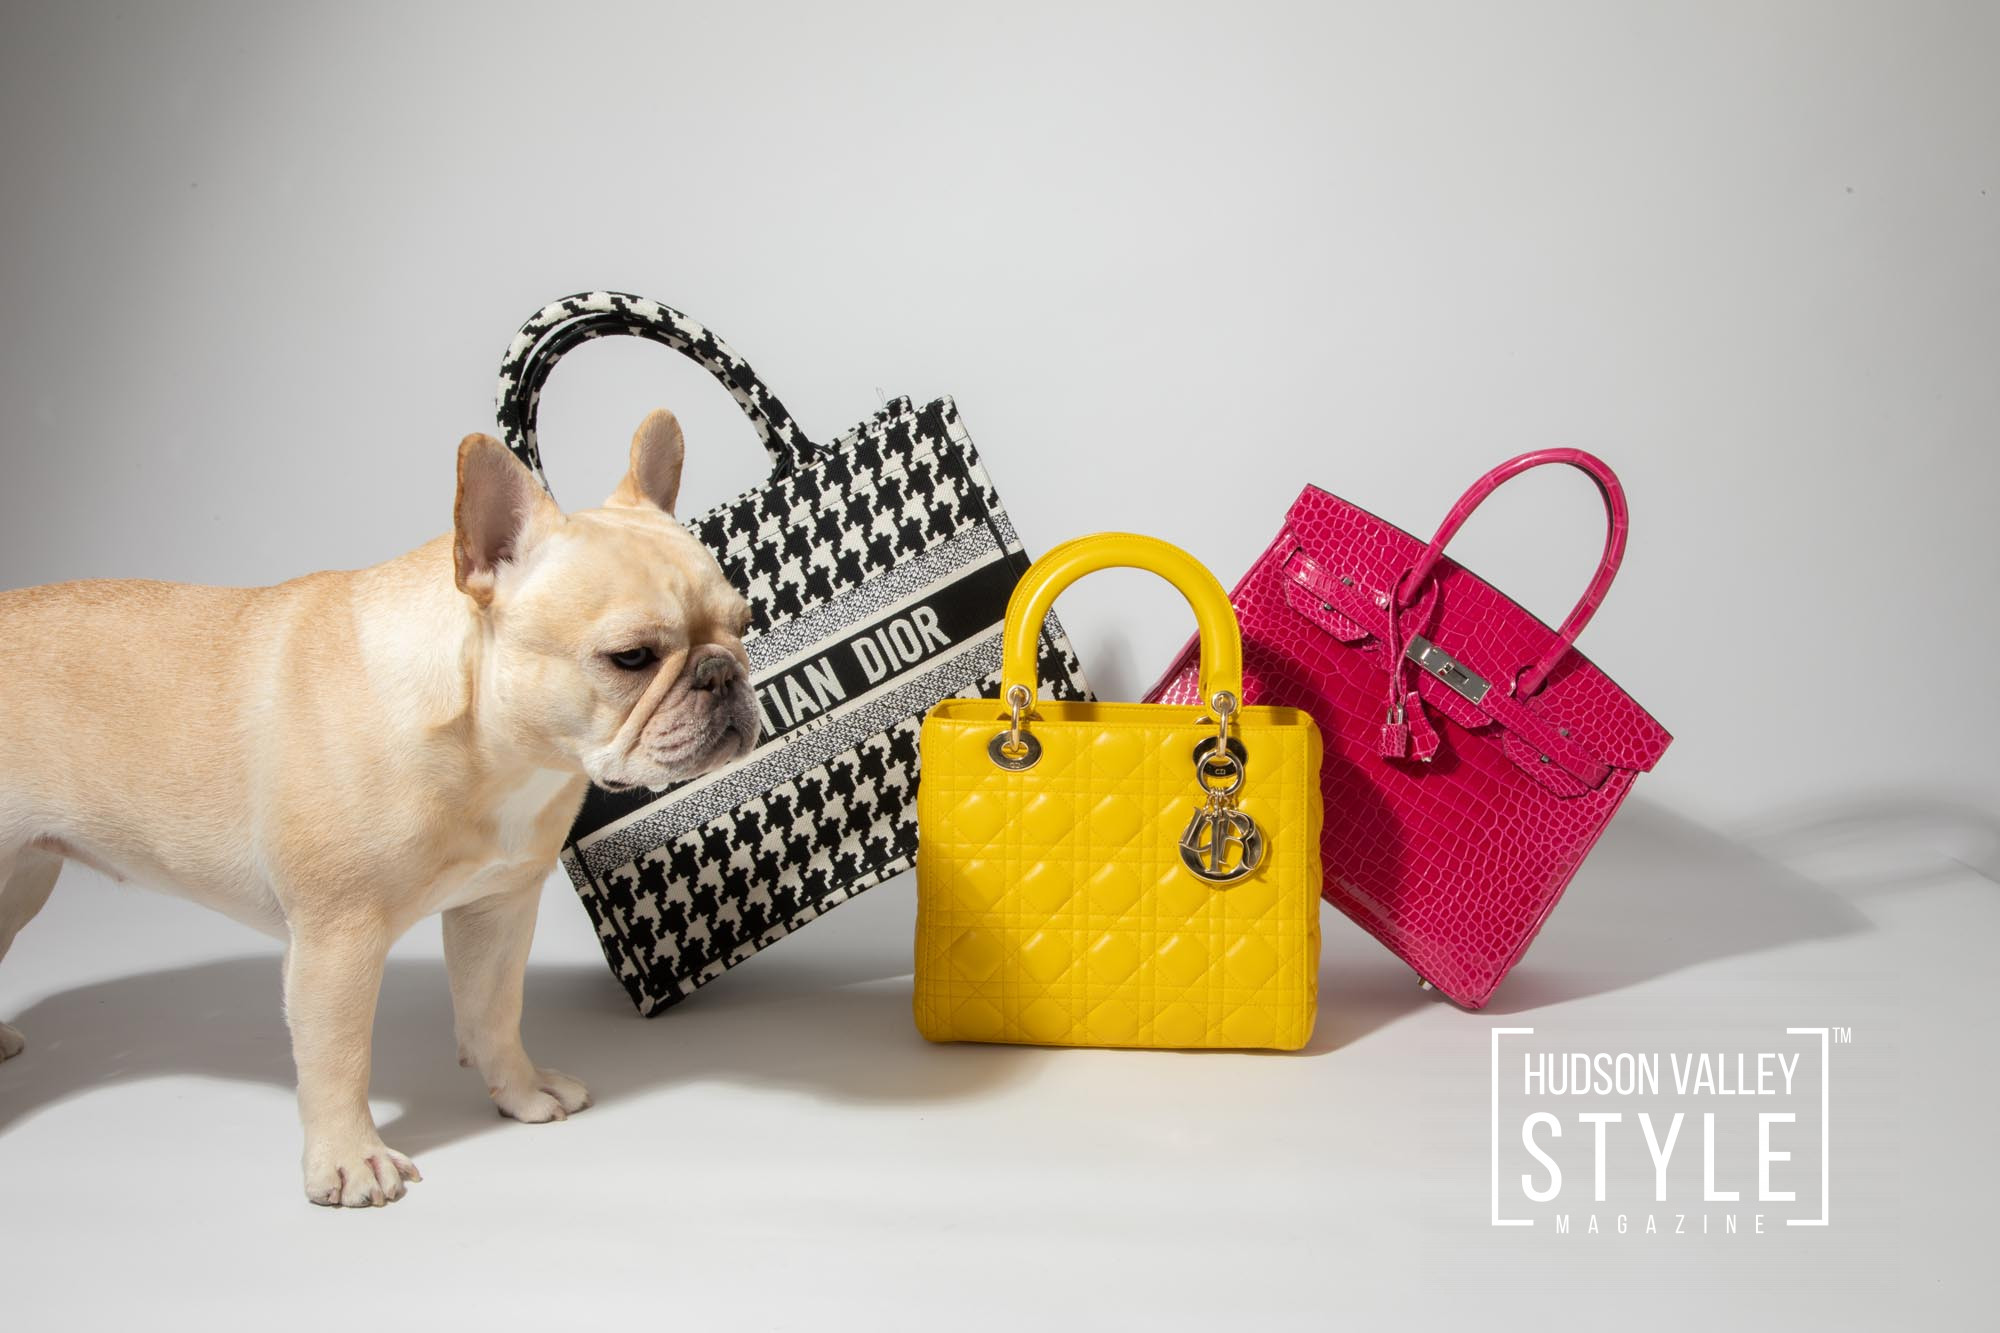 4 Reasons Why You Should Buy Preowned Designer Fashion Accessories